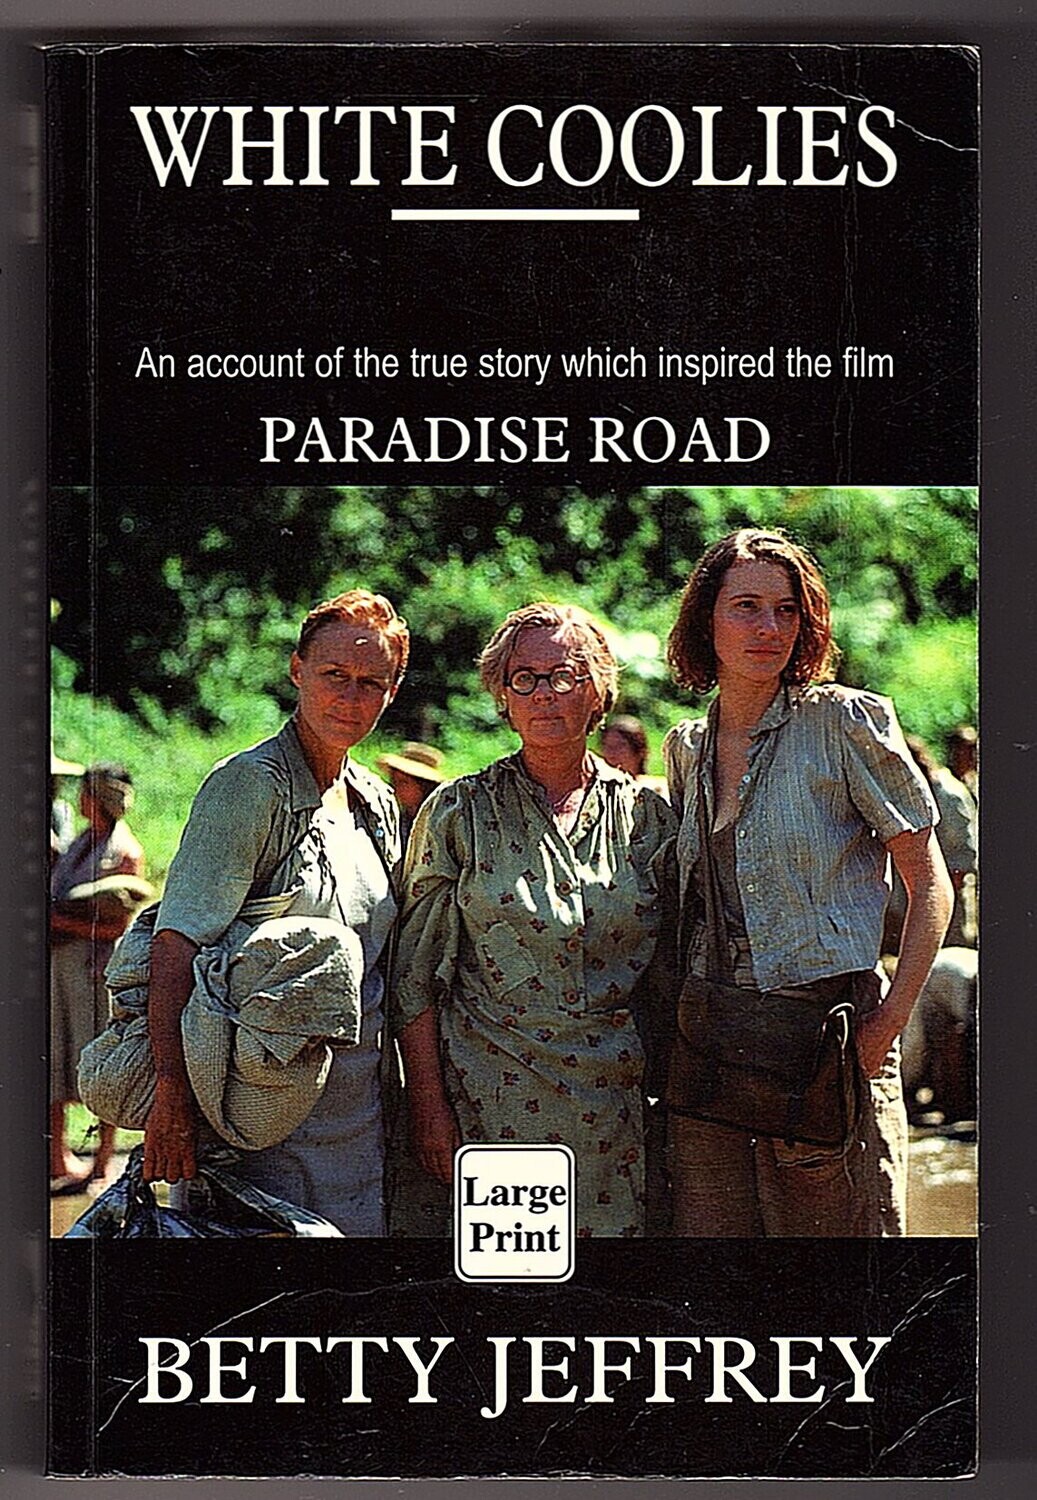 White Coolies: An Account of the True Story That Inspired Paradise Road by Betty Jeffrey